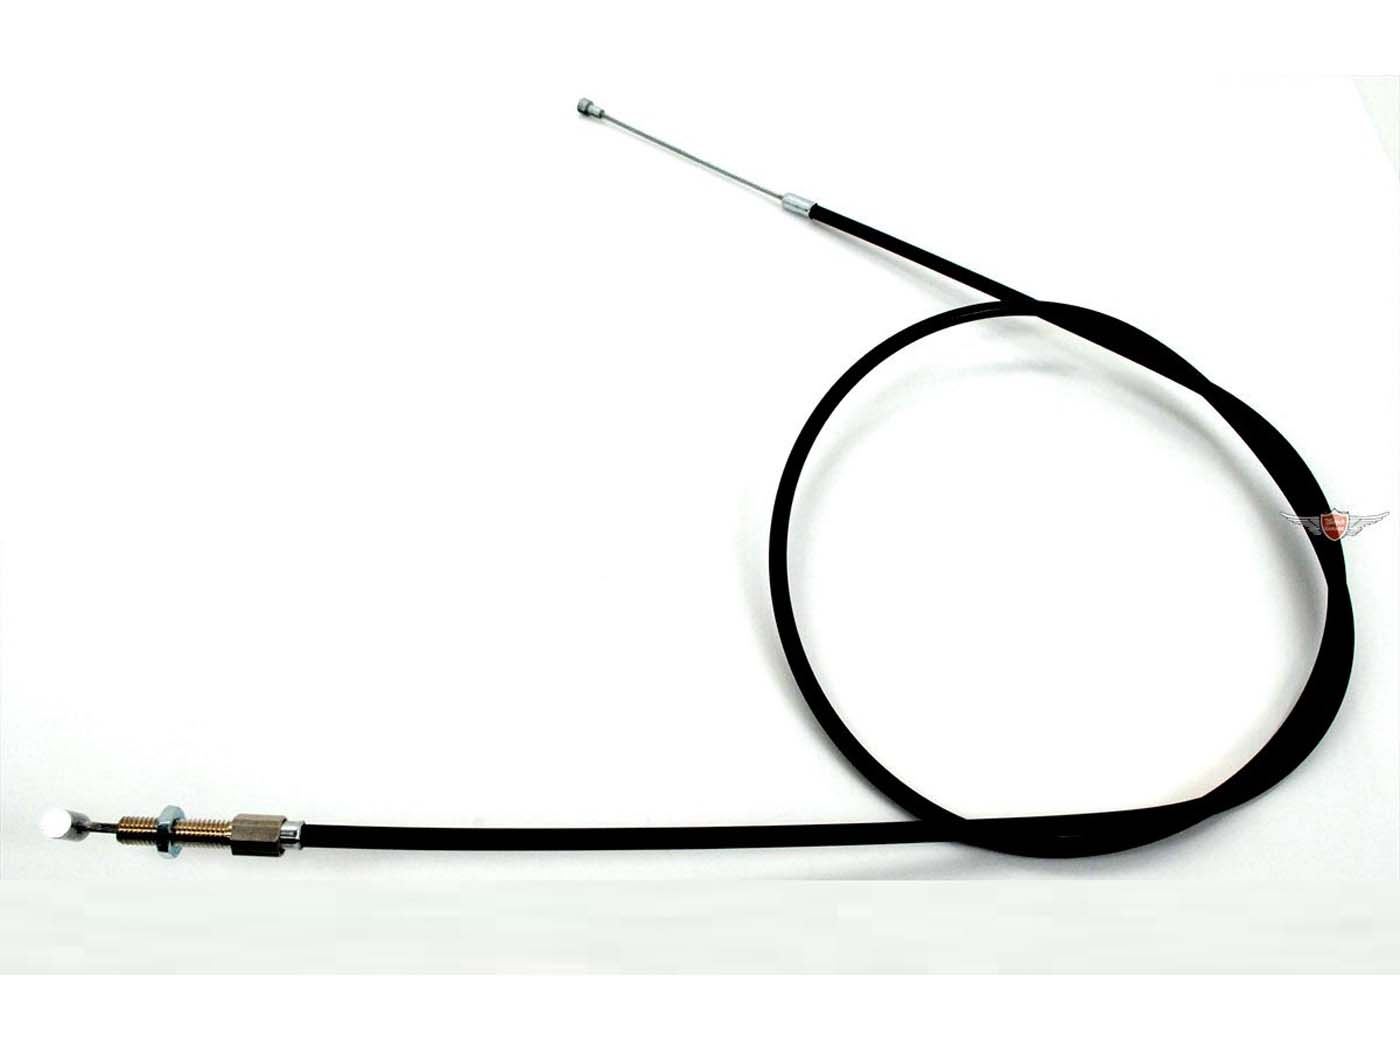 Front Brake Cable For Hercules XE 9 Enduro